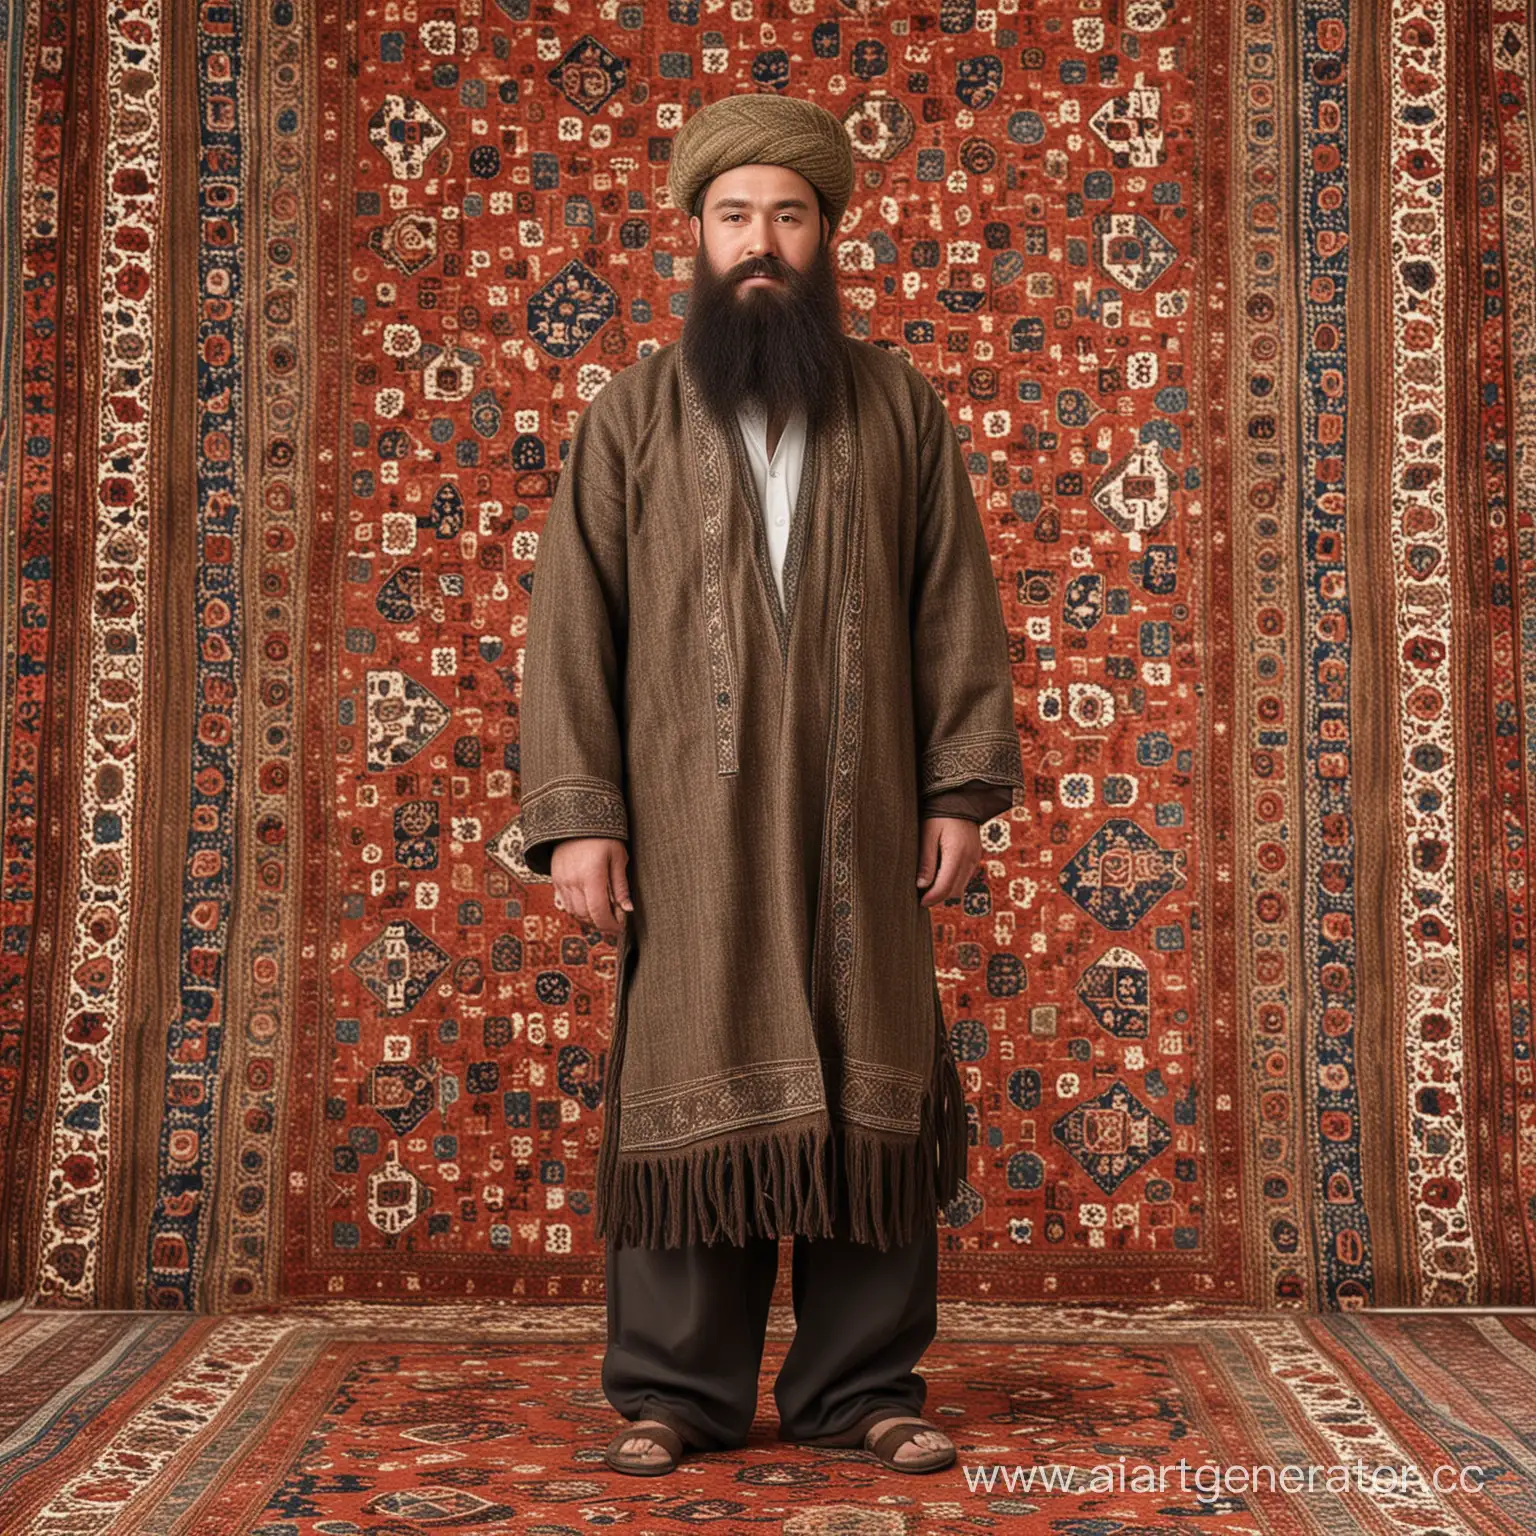 Traditional-Uzbek-Man-Standing-on-Carpet-with-Big-Belly-and-Beard